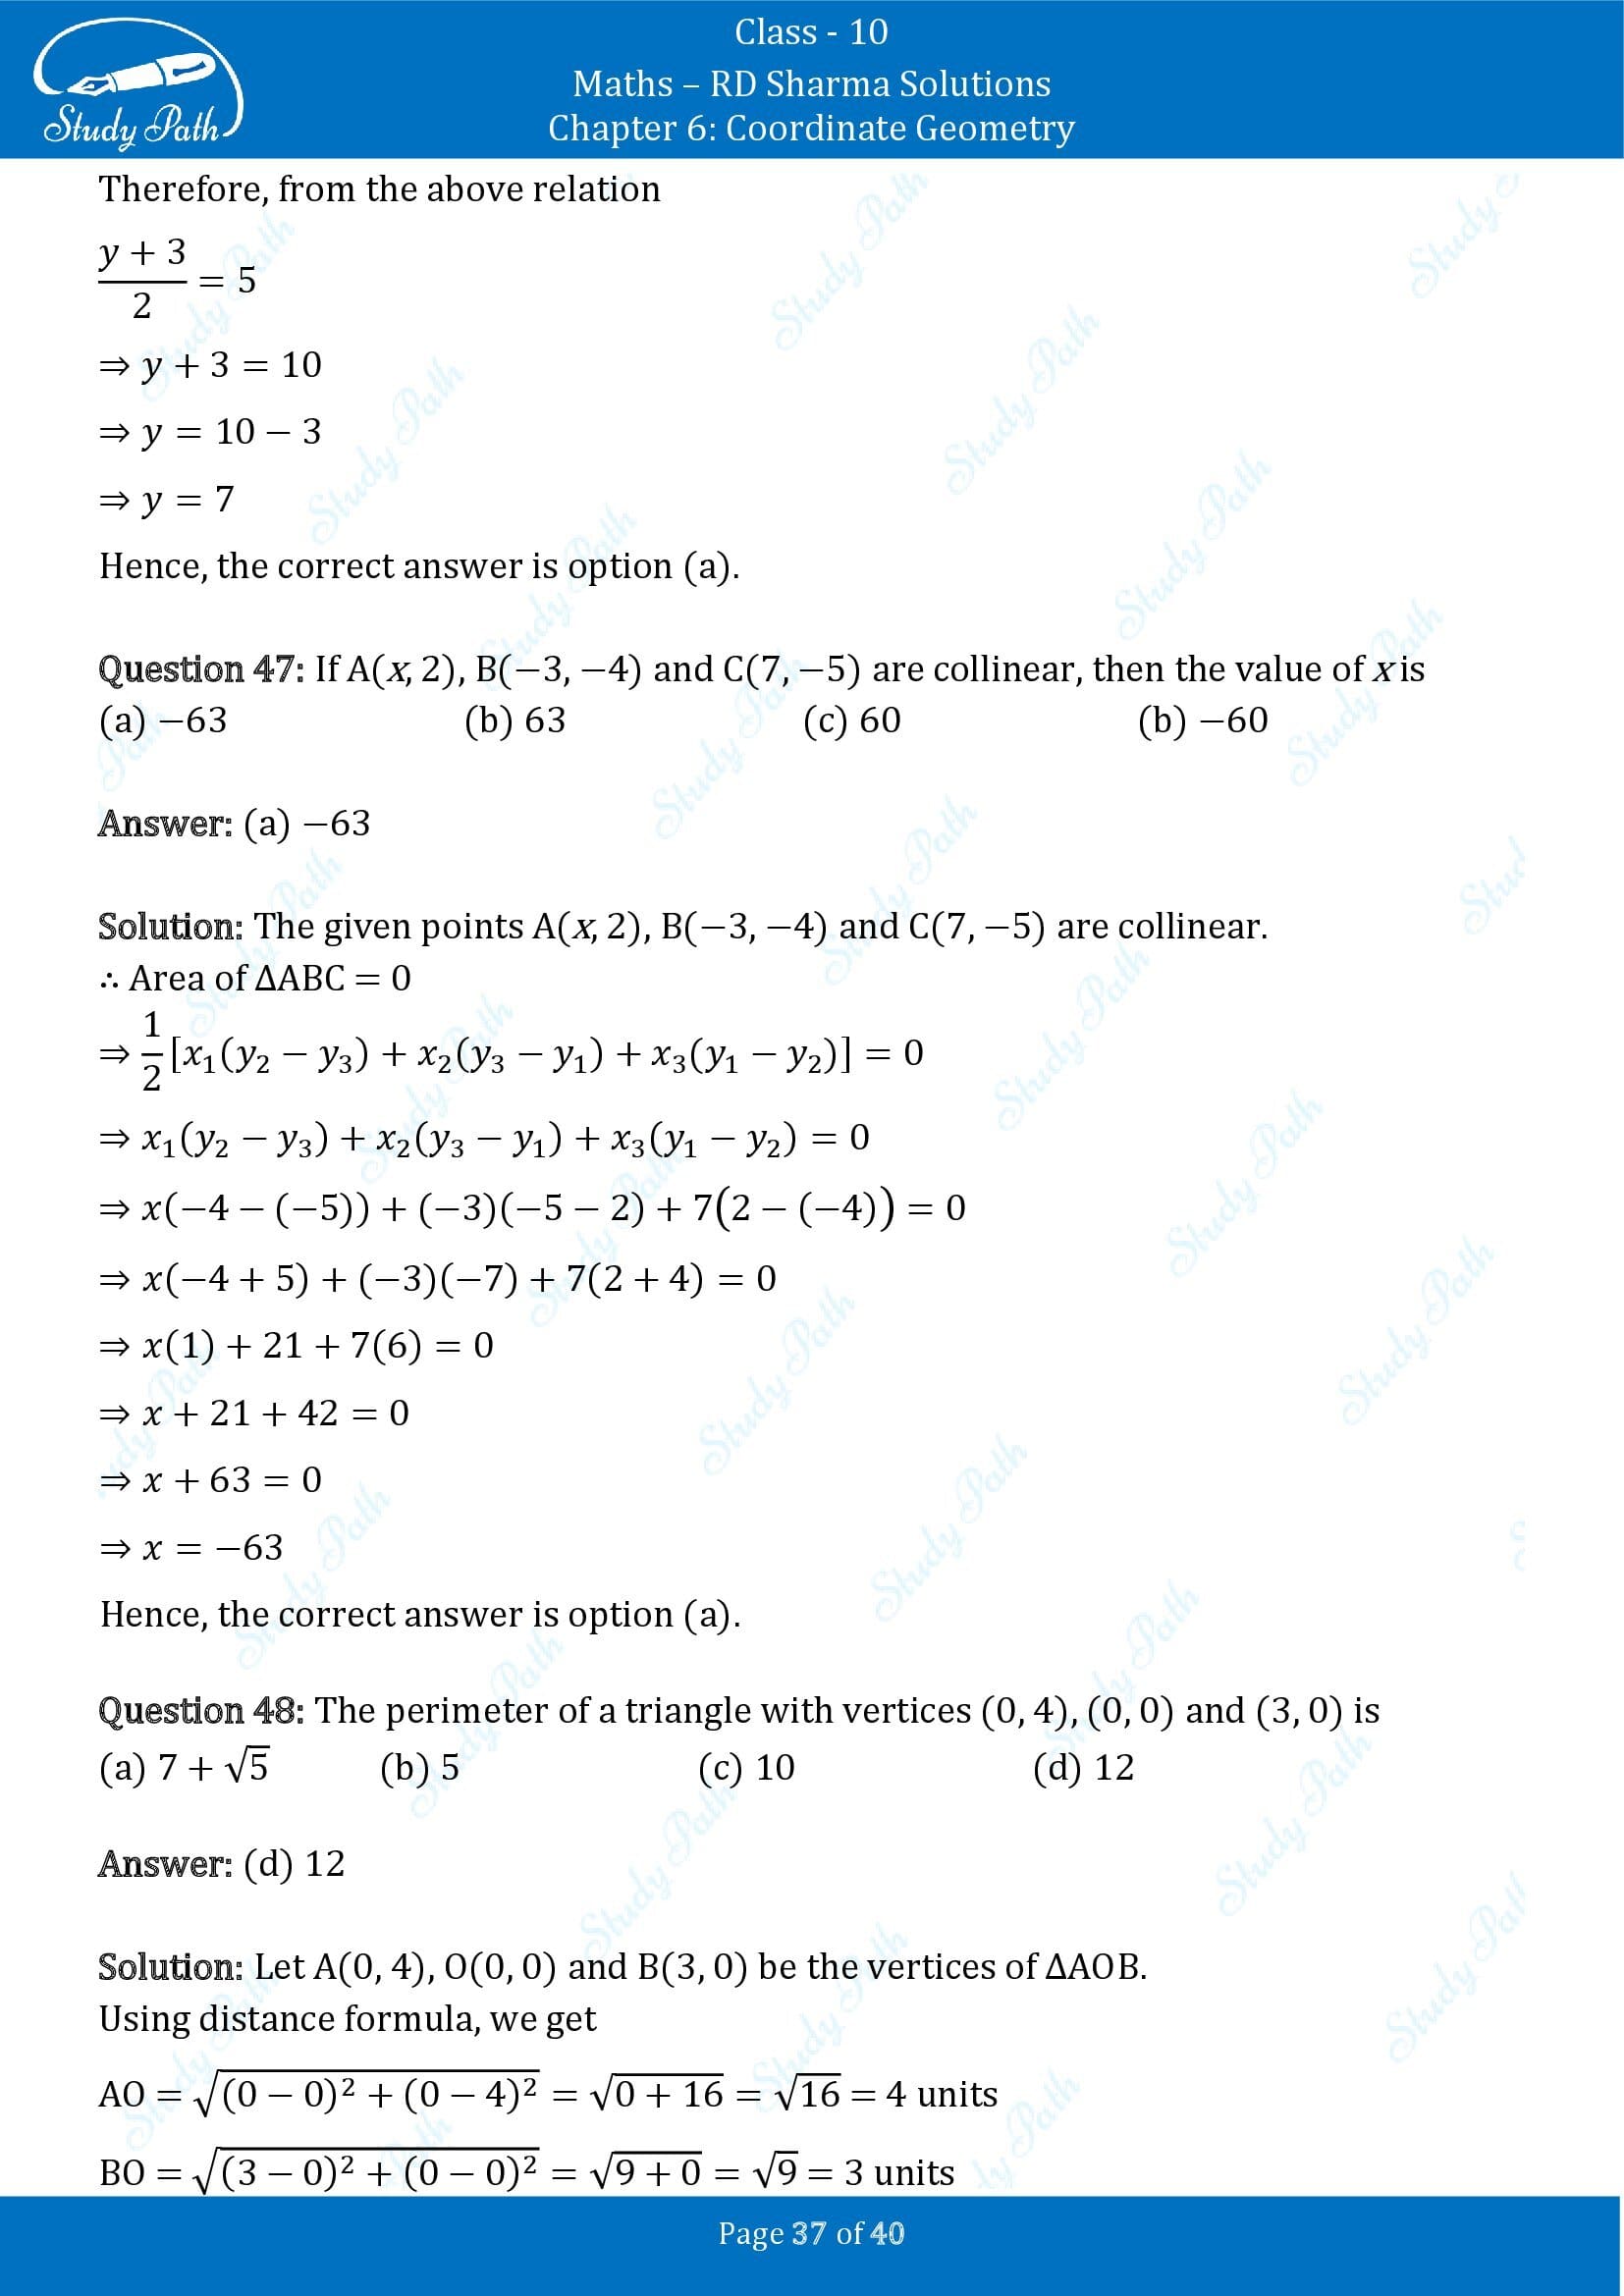 RD Sharma Solutions Class 10 Chapter 6 Coordinate Geometry Multiple Choice Question MCQs 00037